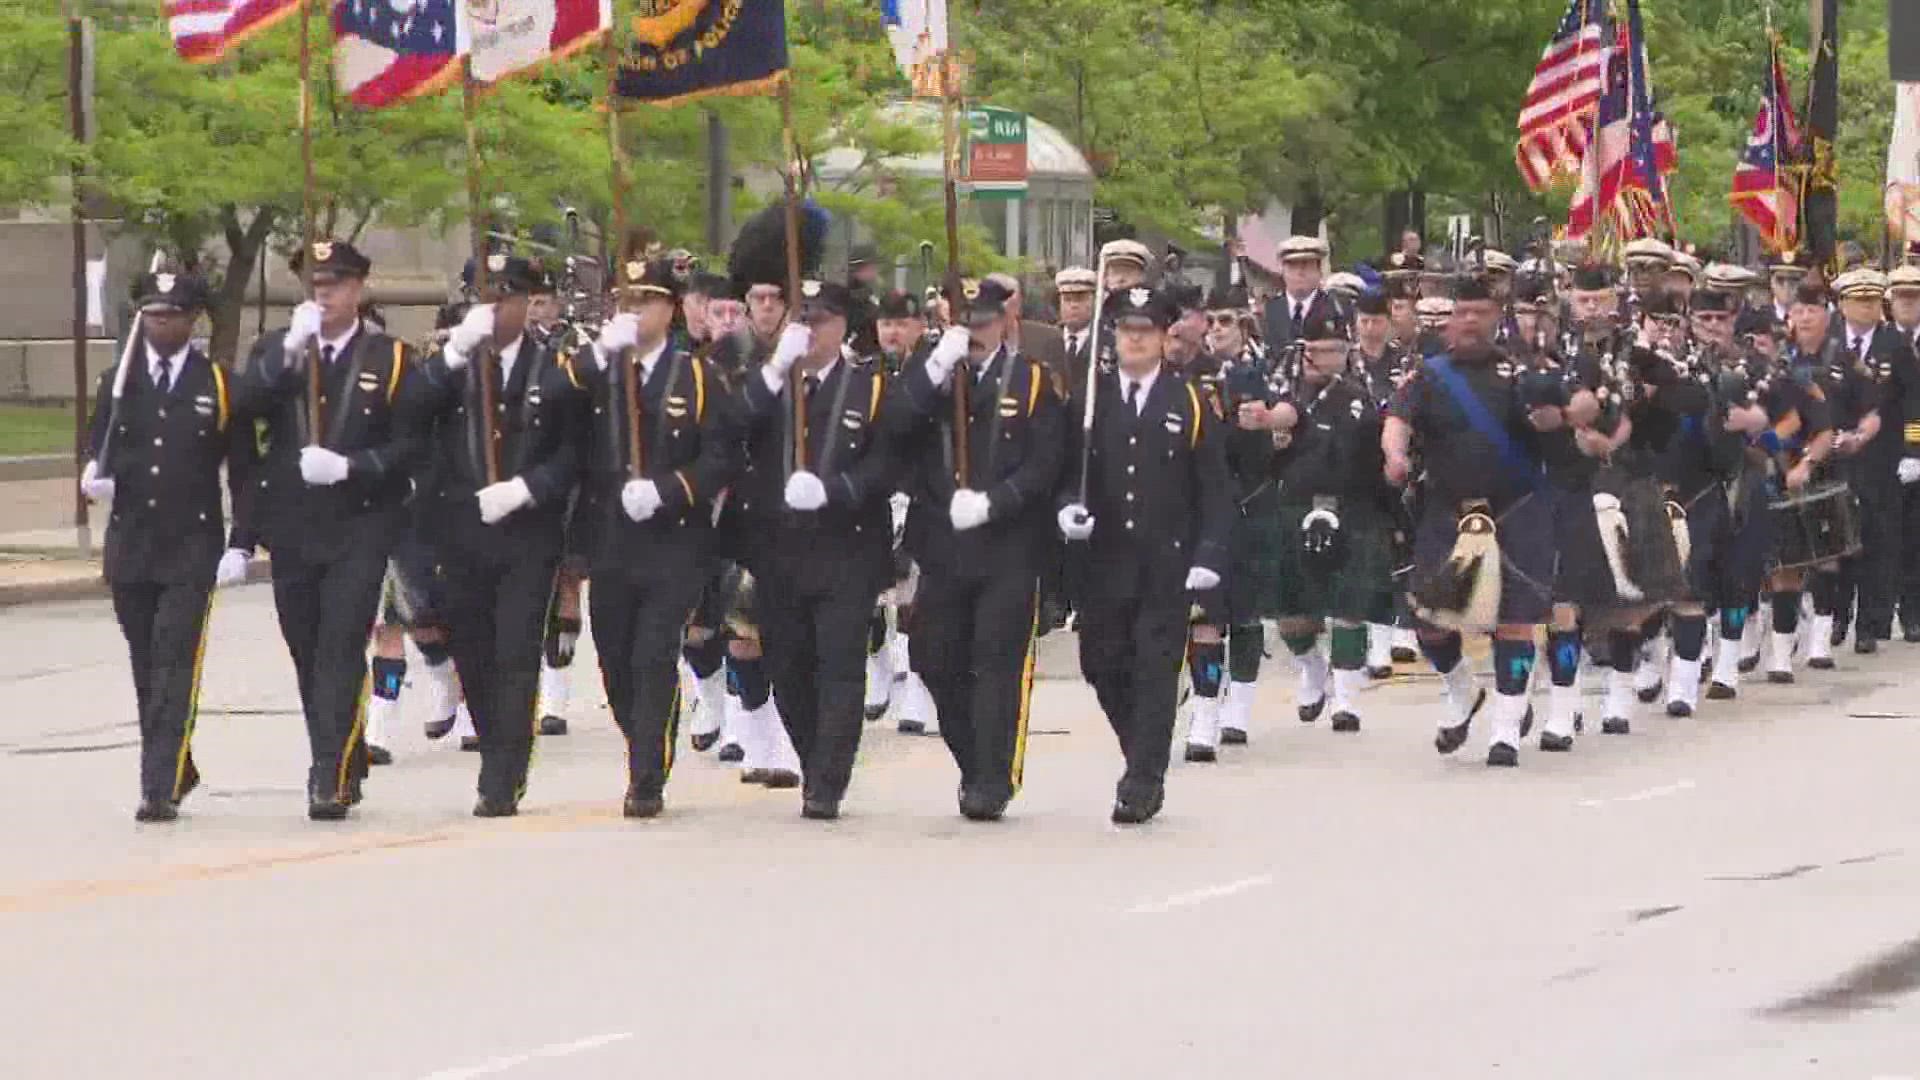 The Cleveland Police Department paid tribute to the lives lost in the line of duty with their annual memorial parade.